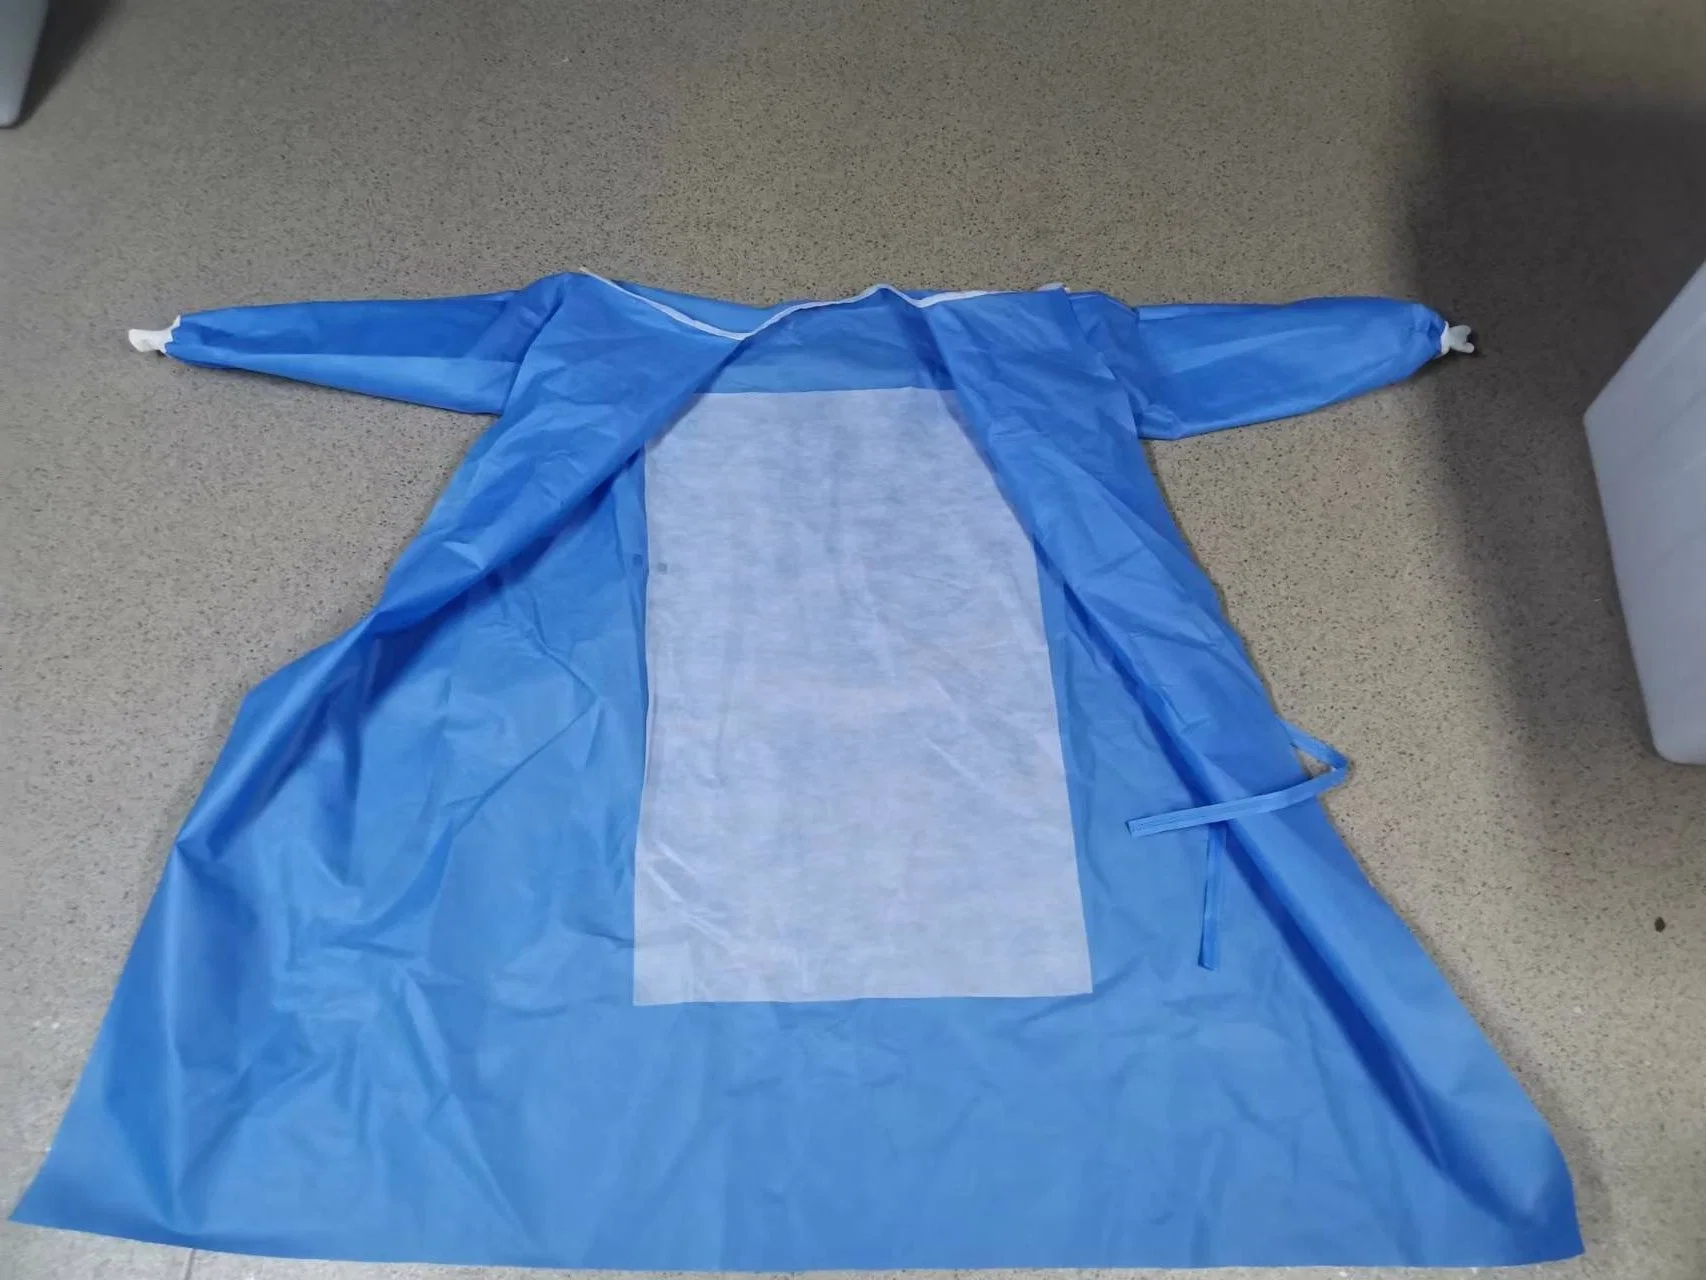 Personal Protective Equipment Hospital PPE Medical Disposable Protective Surgical Isolation Gowns